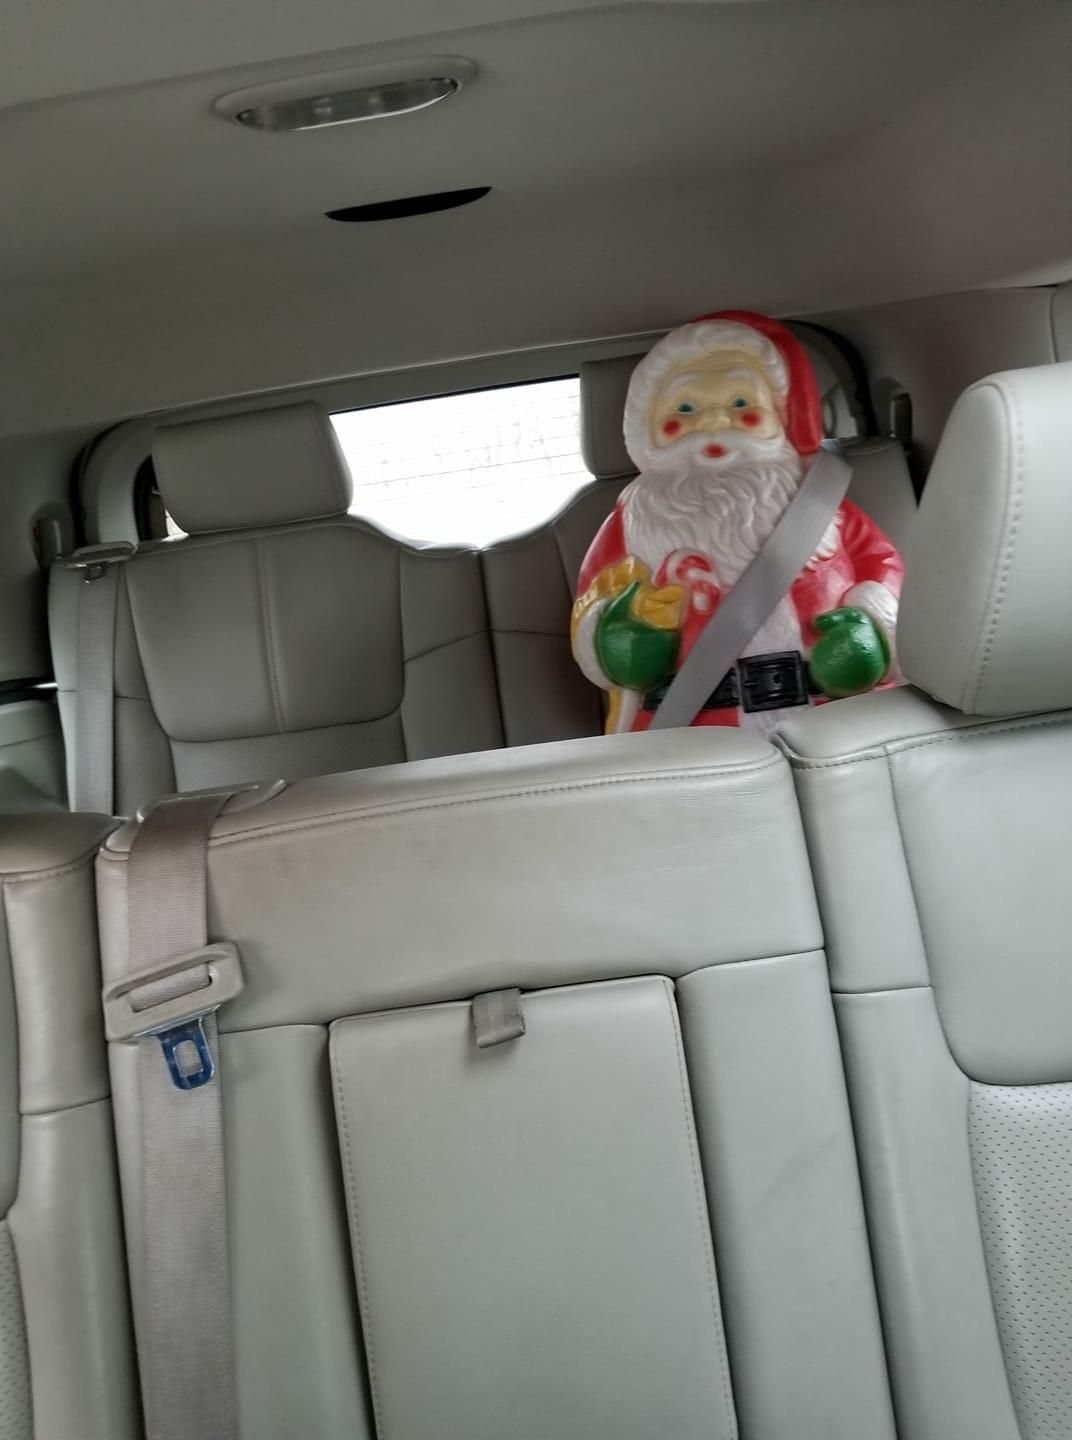 My 9yr old left a surprise for my wife. Scaring the shit out of her when she checked the rear view. Kids....